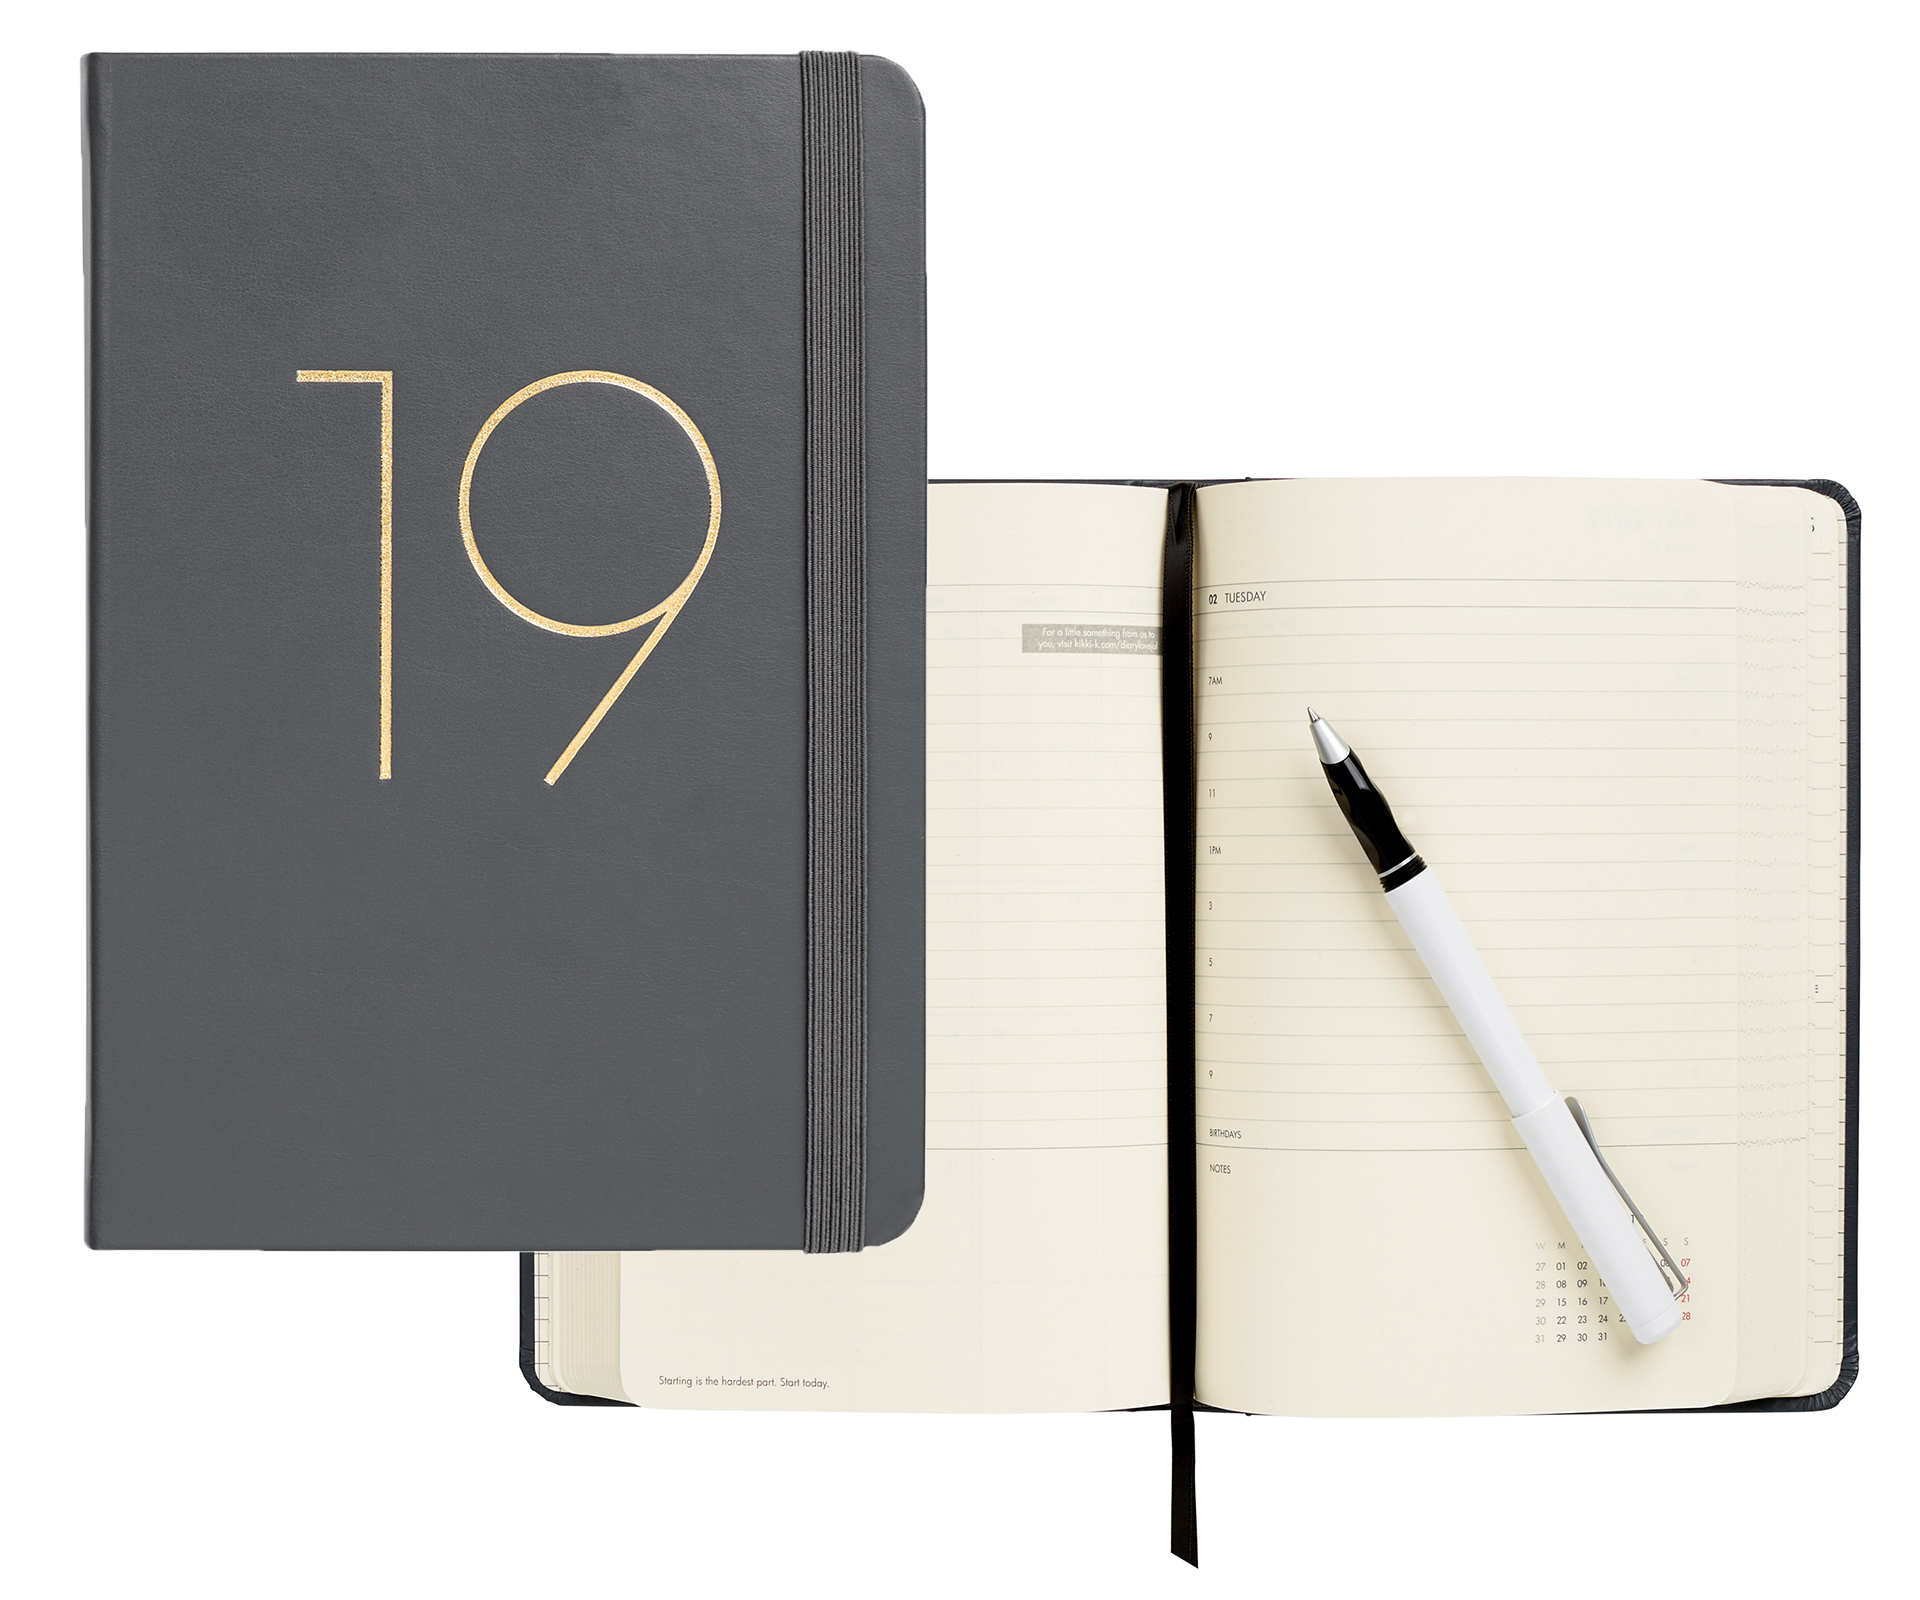 2019 A5 daily diary This Kikki.K charcoal grey diary includes daily and monthly views, perfect for those who like to plan in detail. It comes with stickers for customisation and has pages for keeping track of addresses, expenses and favourite restaurants. It’s also available in blush and dusk blue. $38.43 from Kikki. K.